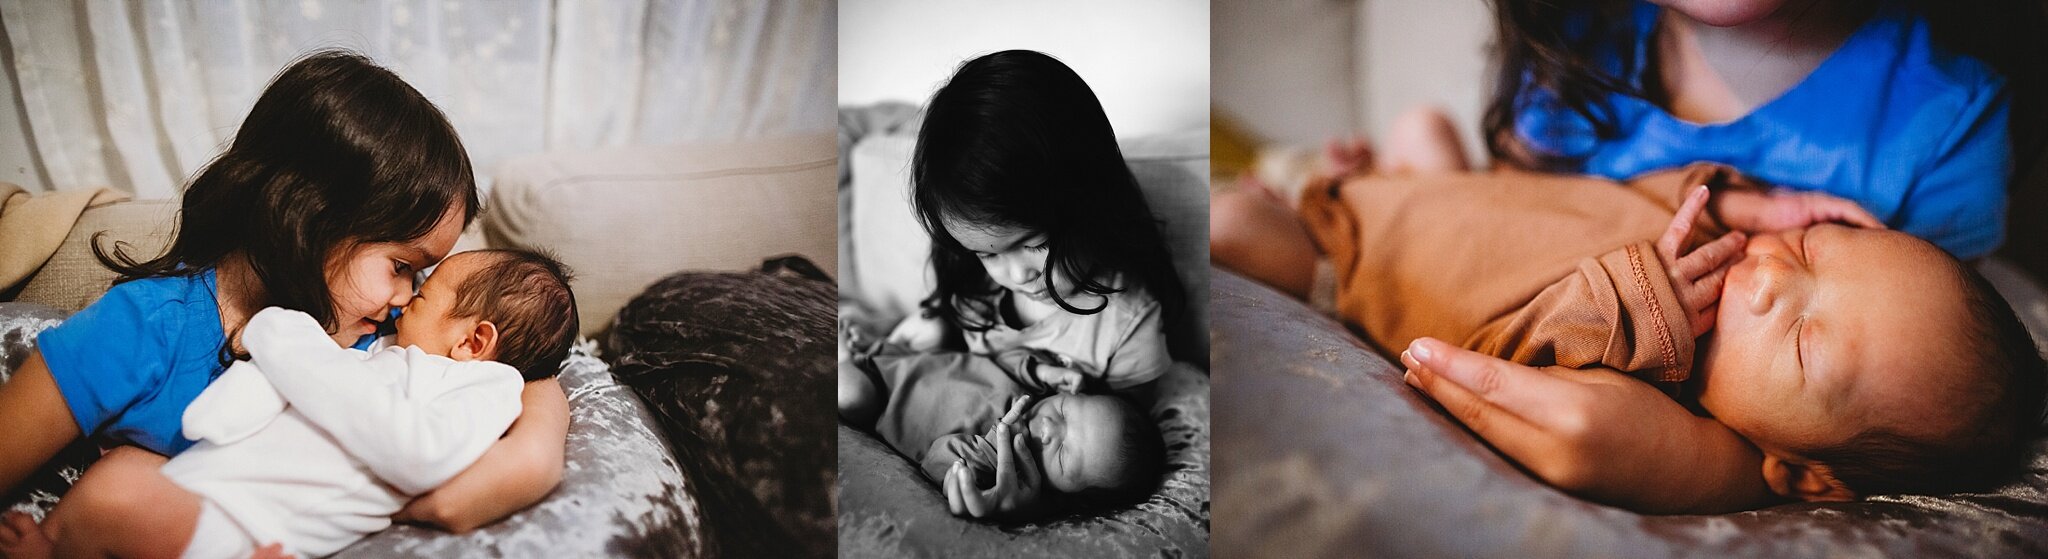 toddler and newborn photo shoot, lifestyle photographer st pete